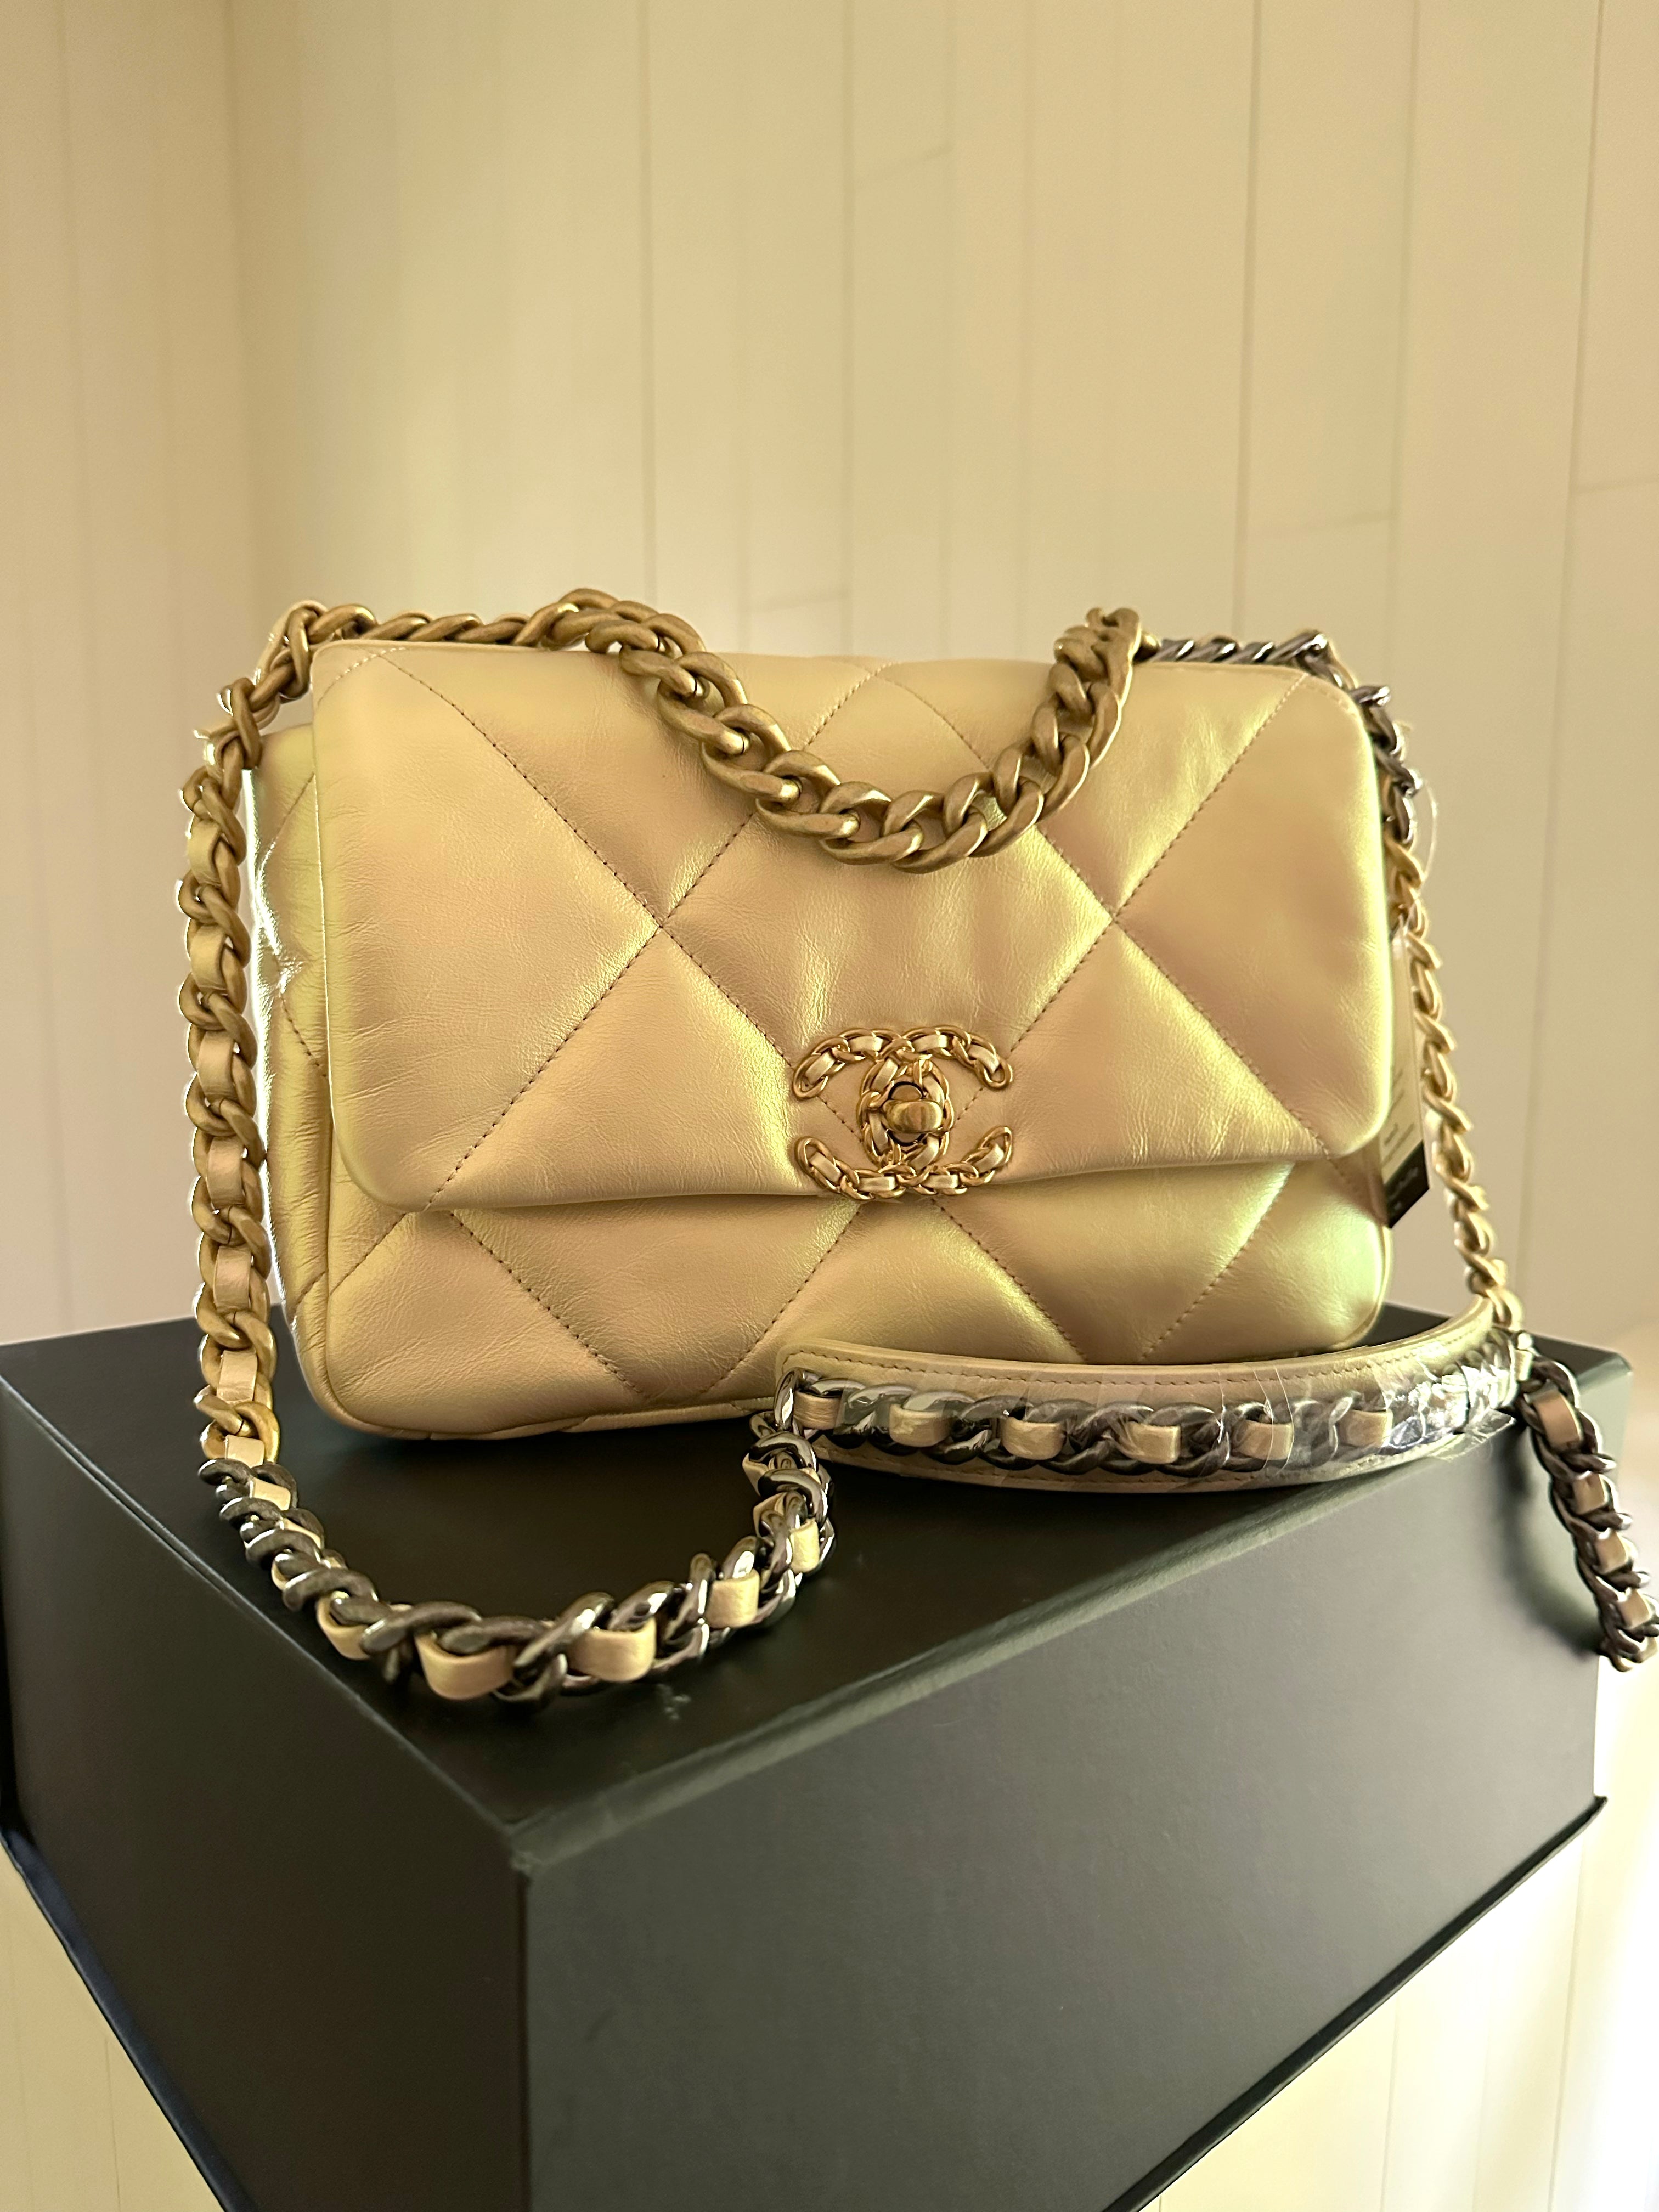 Chanel 19 Flap Bag Quilted Leather Medium Green